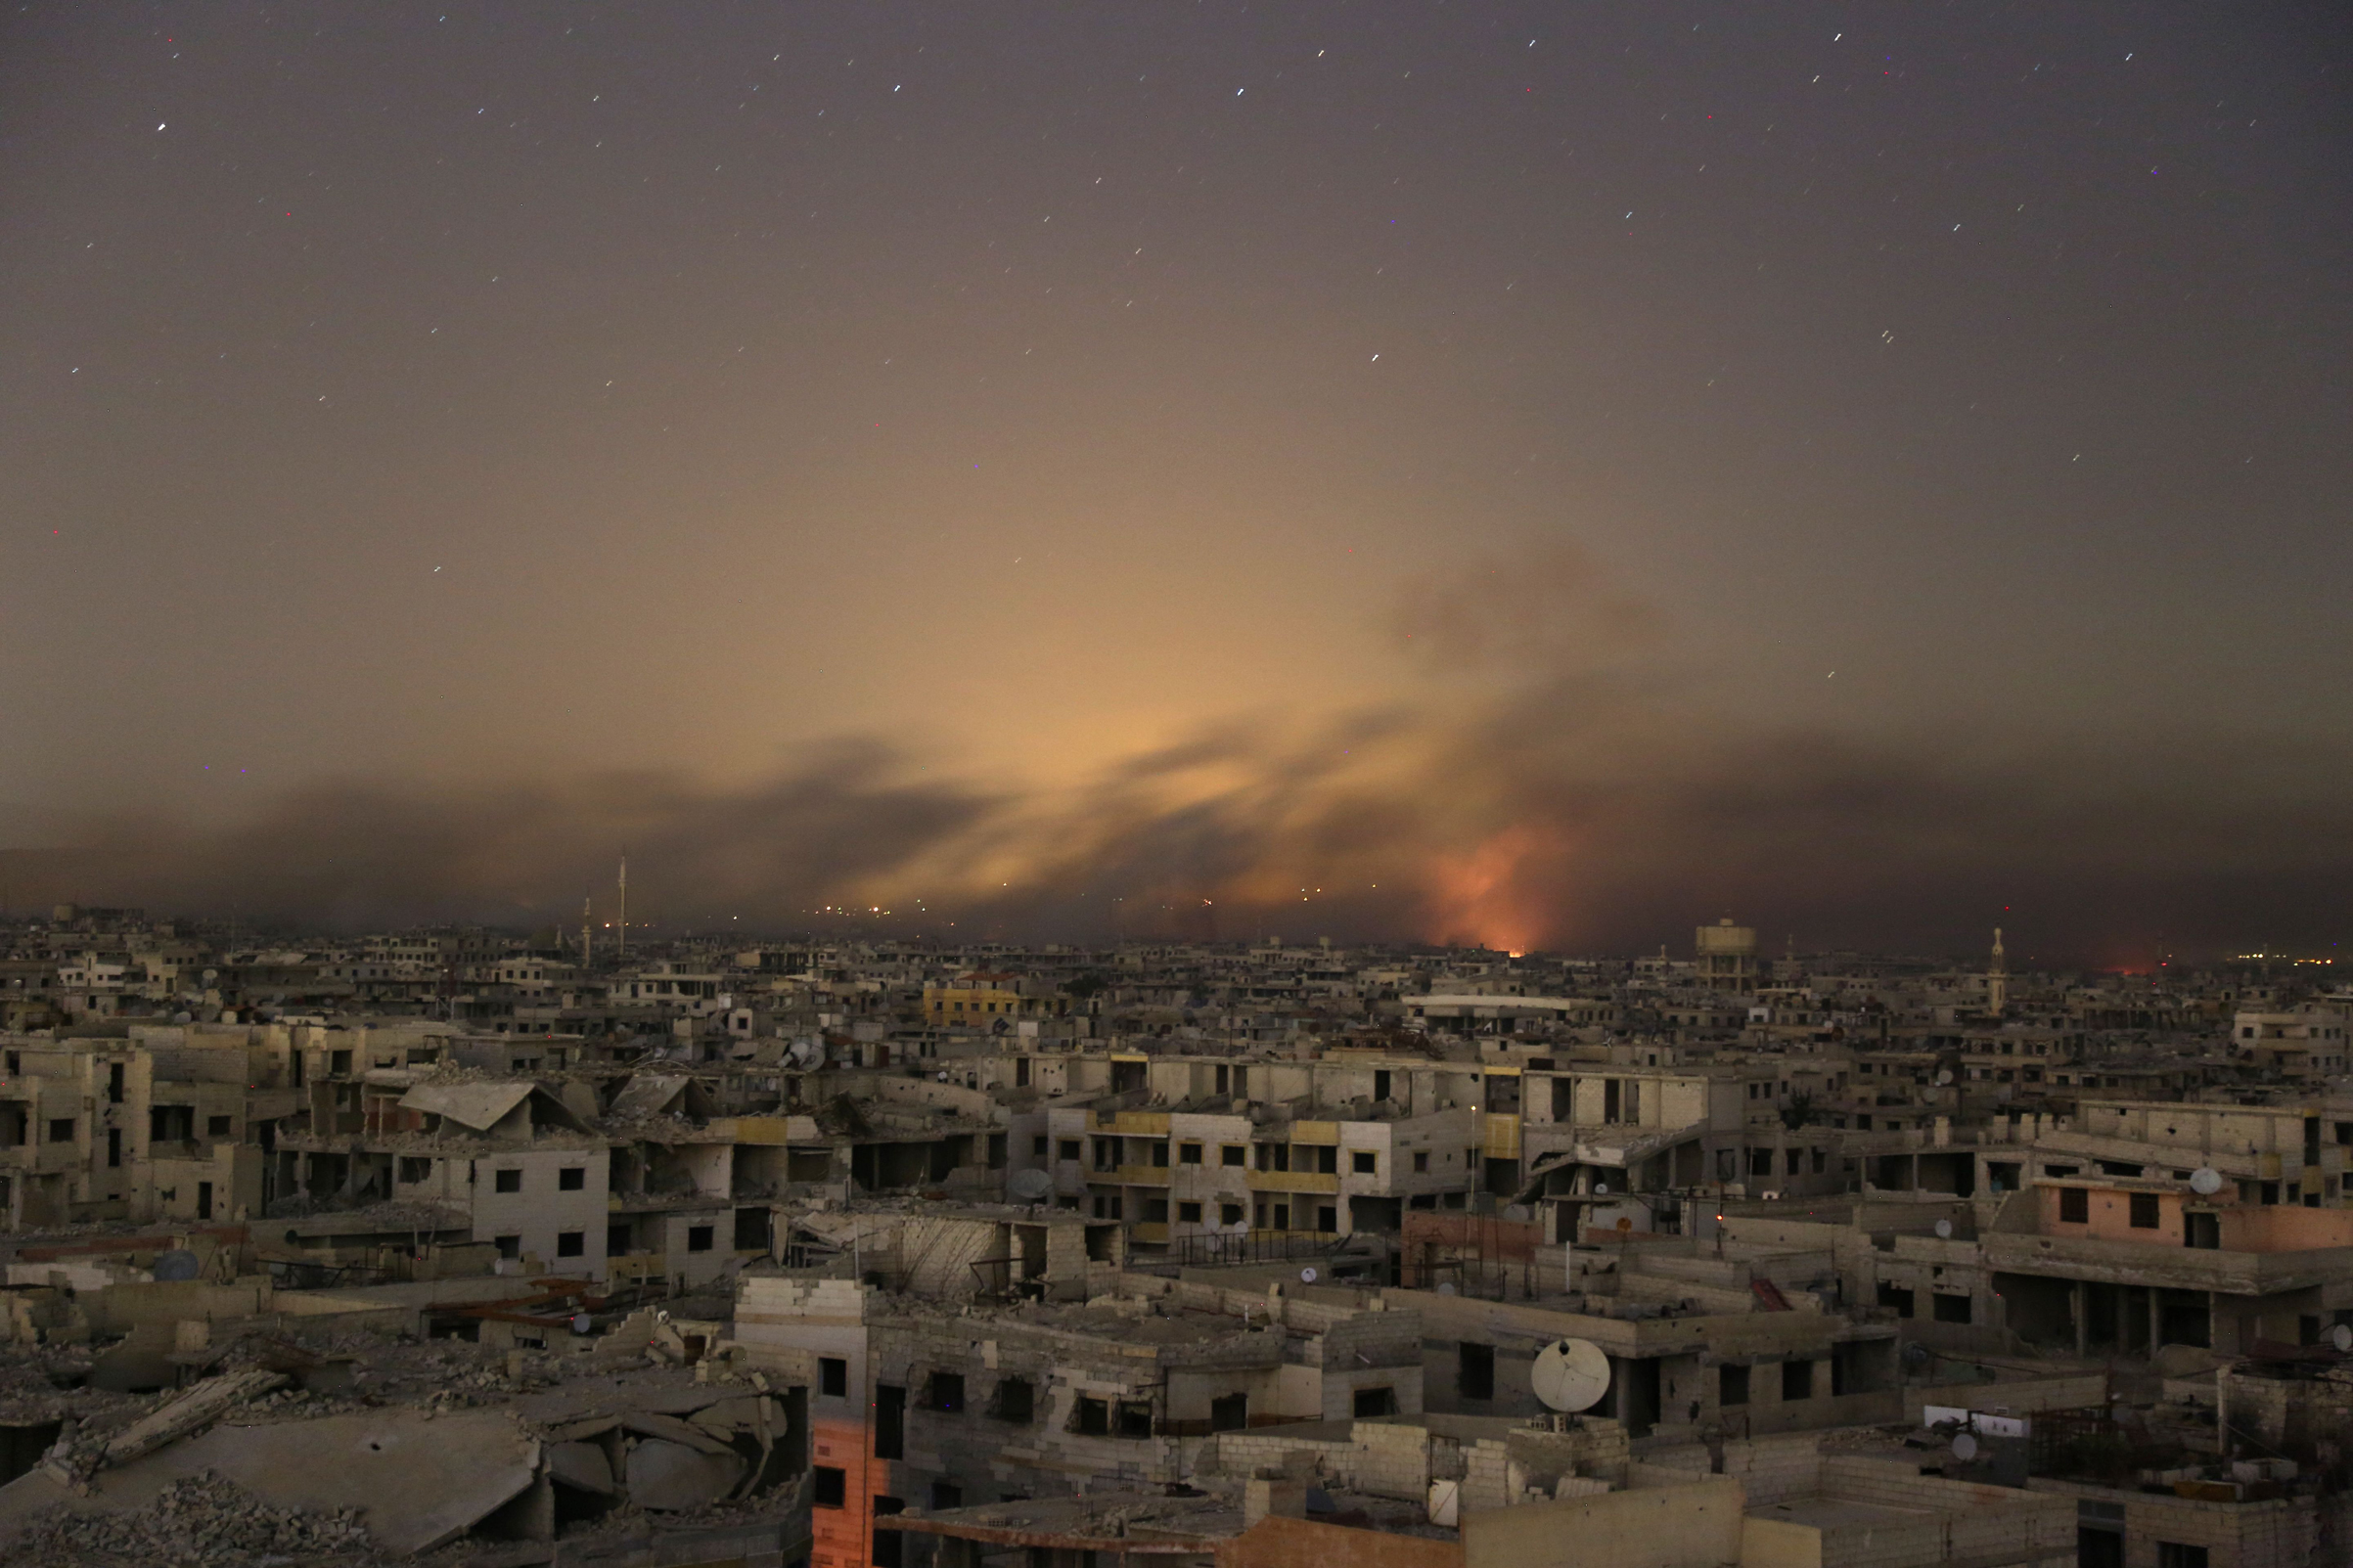 Smoke rises during Syrian government bombardment on the rebel-controlled town of Arbin, in the besieged Eastern Ghouta region on the outskirts of the capital Damascus, on late March 11, 2018. (Ammar Sulieman/AFP/Getty Images)